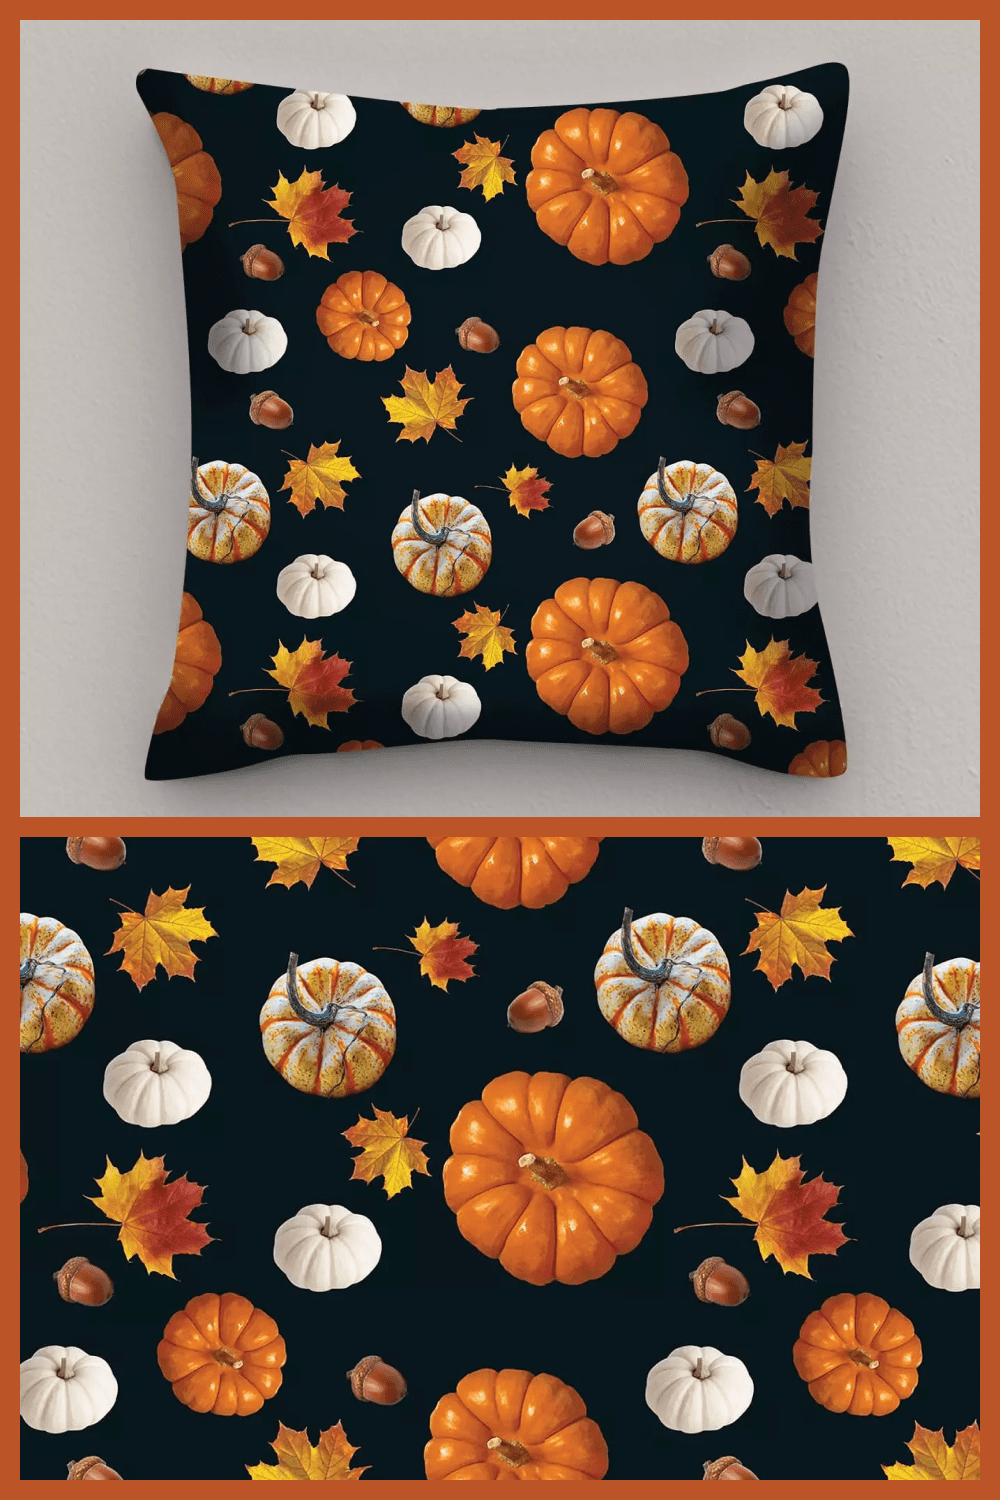 Black pillow with pumpkins and yellow leaves.